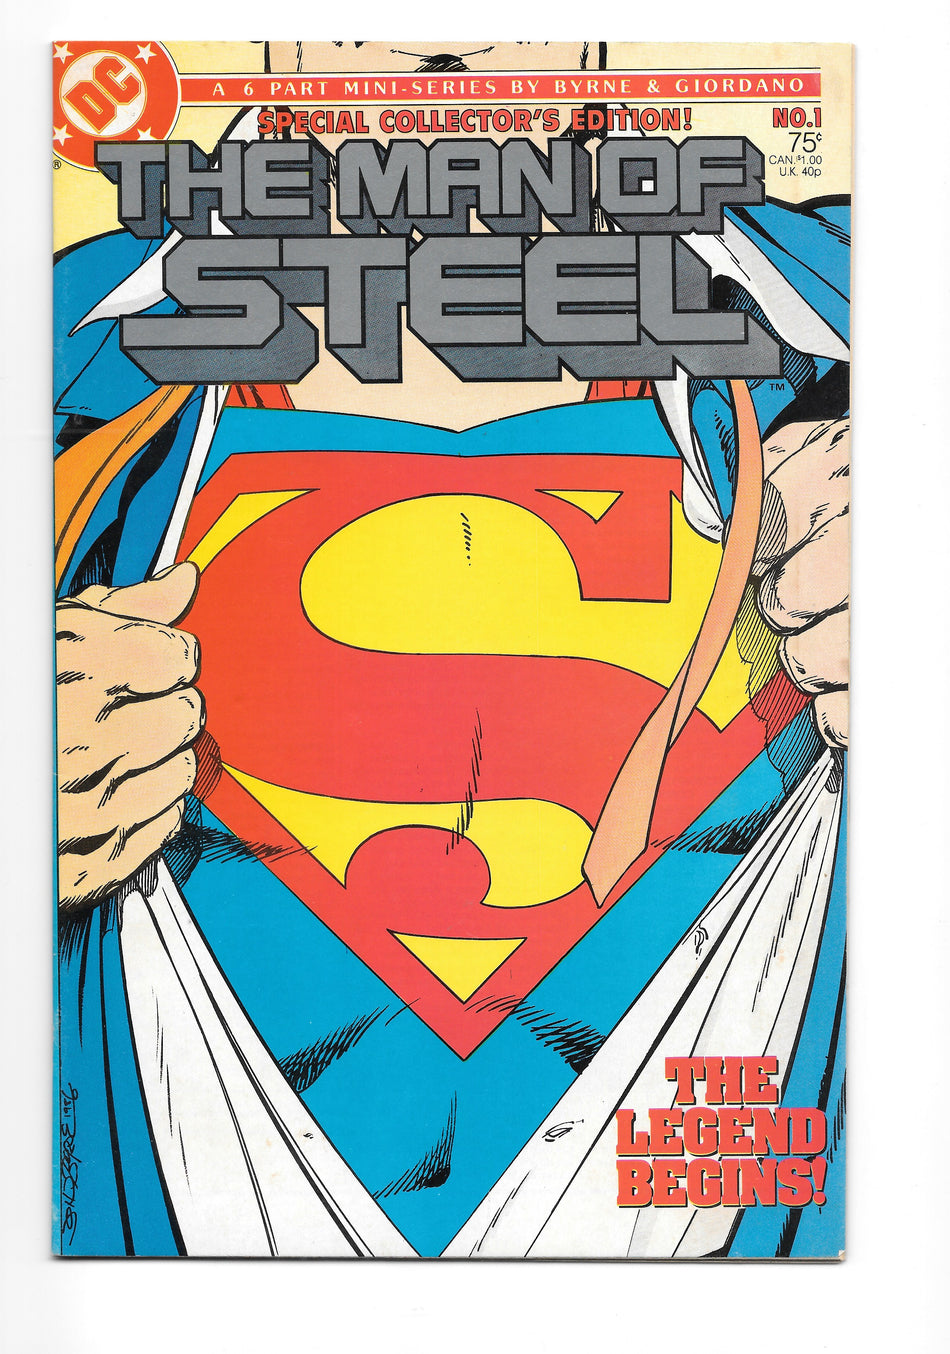 Photo of Man Of Steel, Vol. 1 (1986)  Iss 1B Very Fine  Comic sold by Stronghold Collectibles